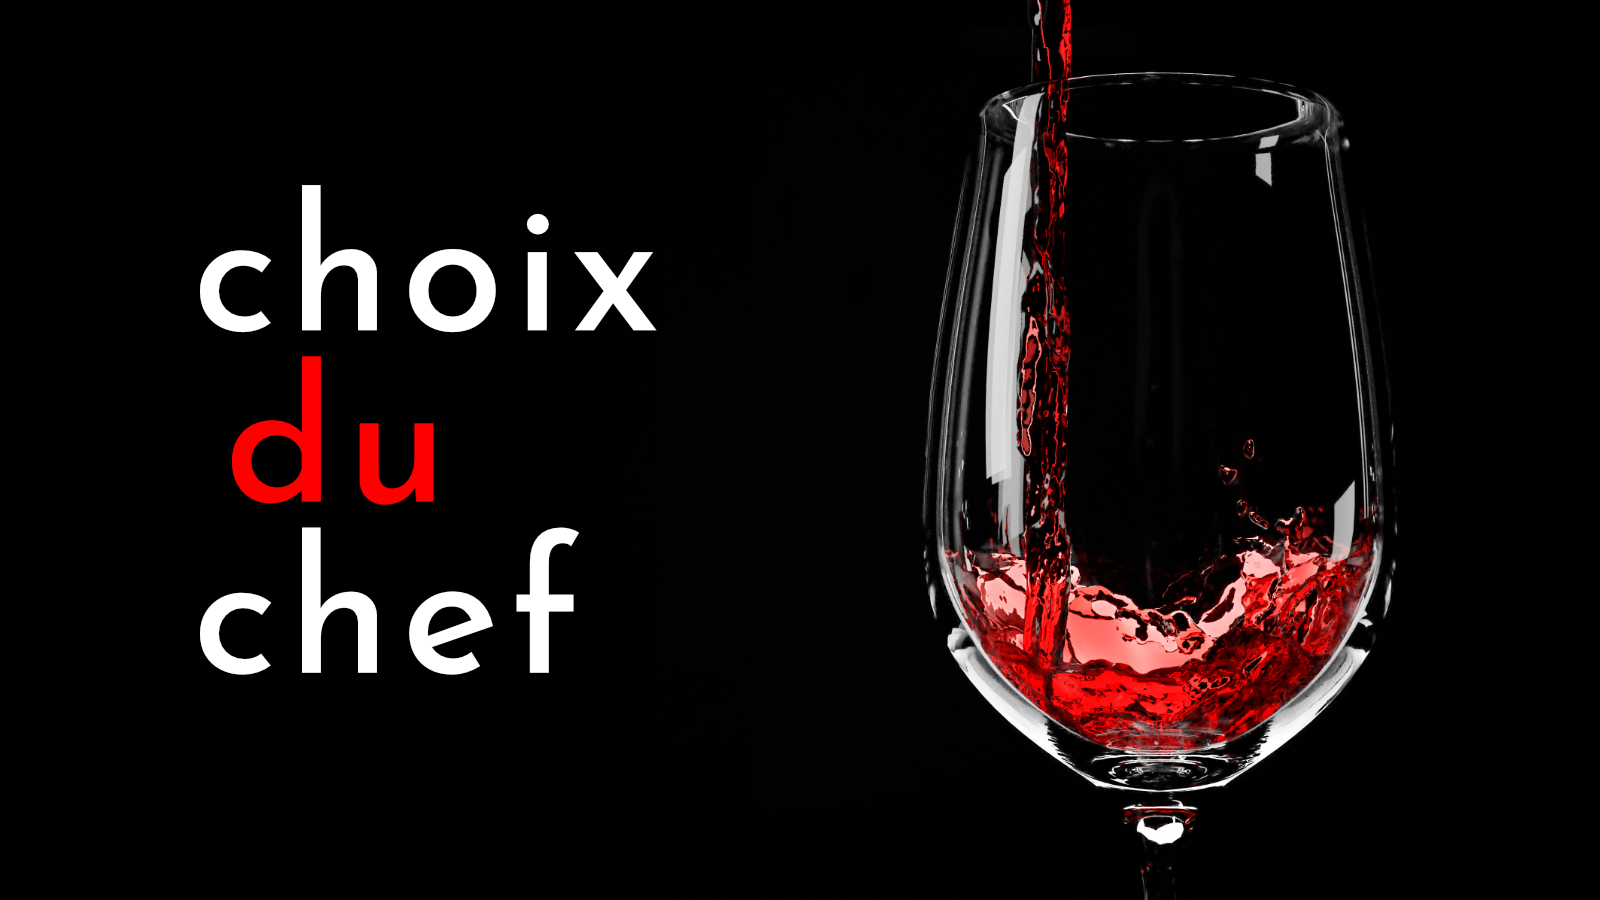 Choix du Chef logo beside a glass of red wine being poured